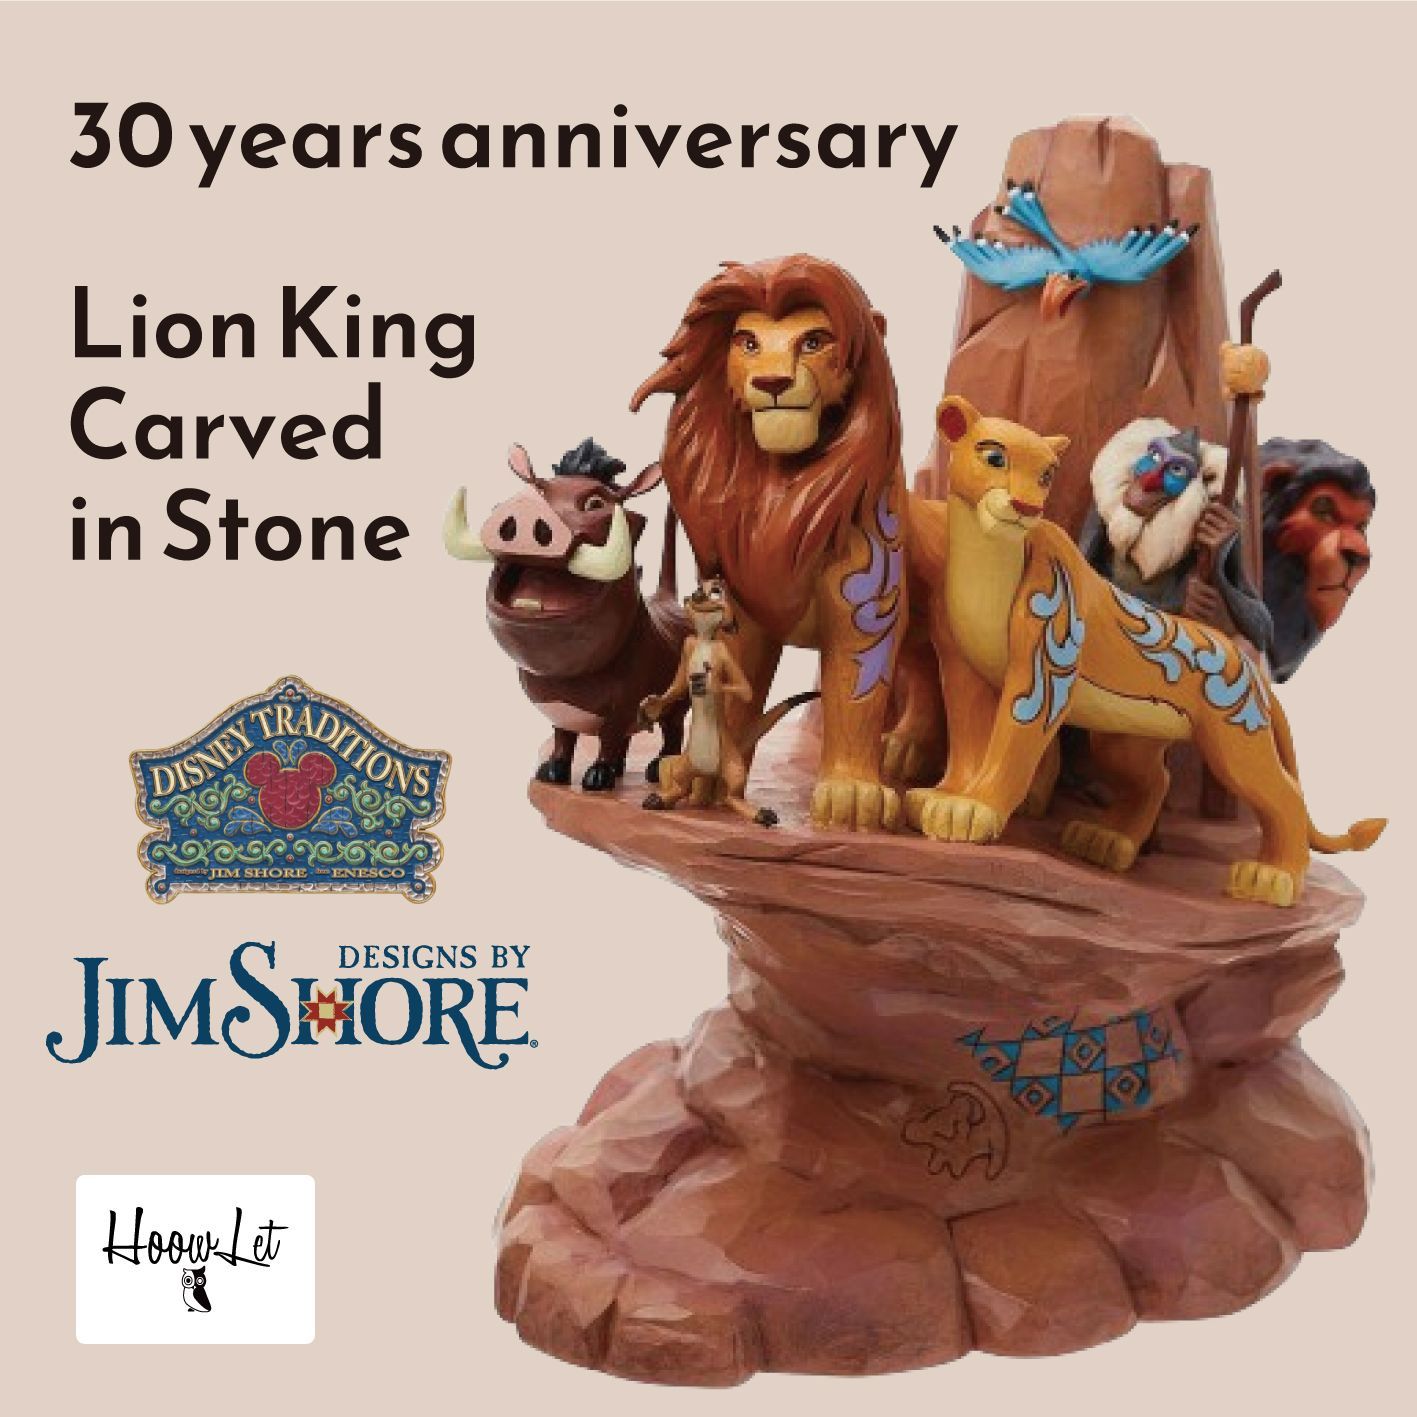 Lion King Carved in Stone – Jim Shore